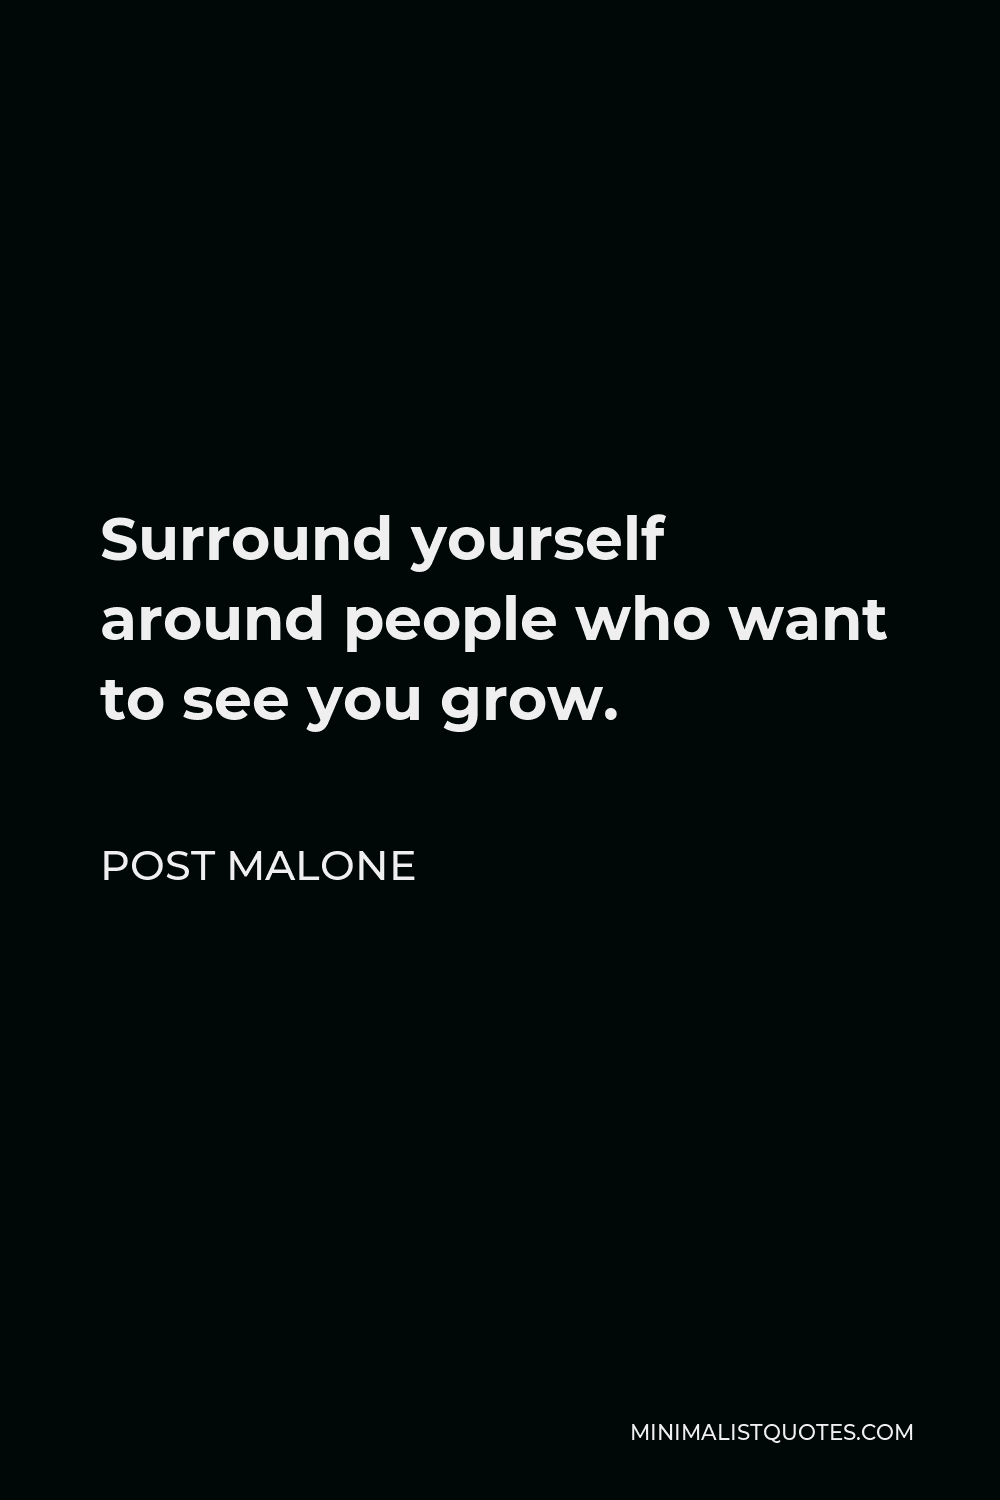 Post Malone Quote - Surround yourself around people who want to see you grow.